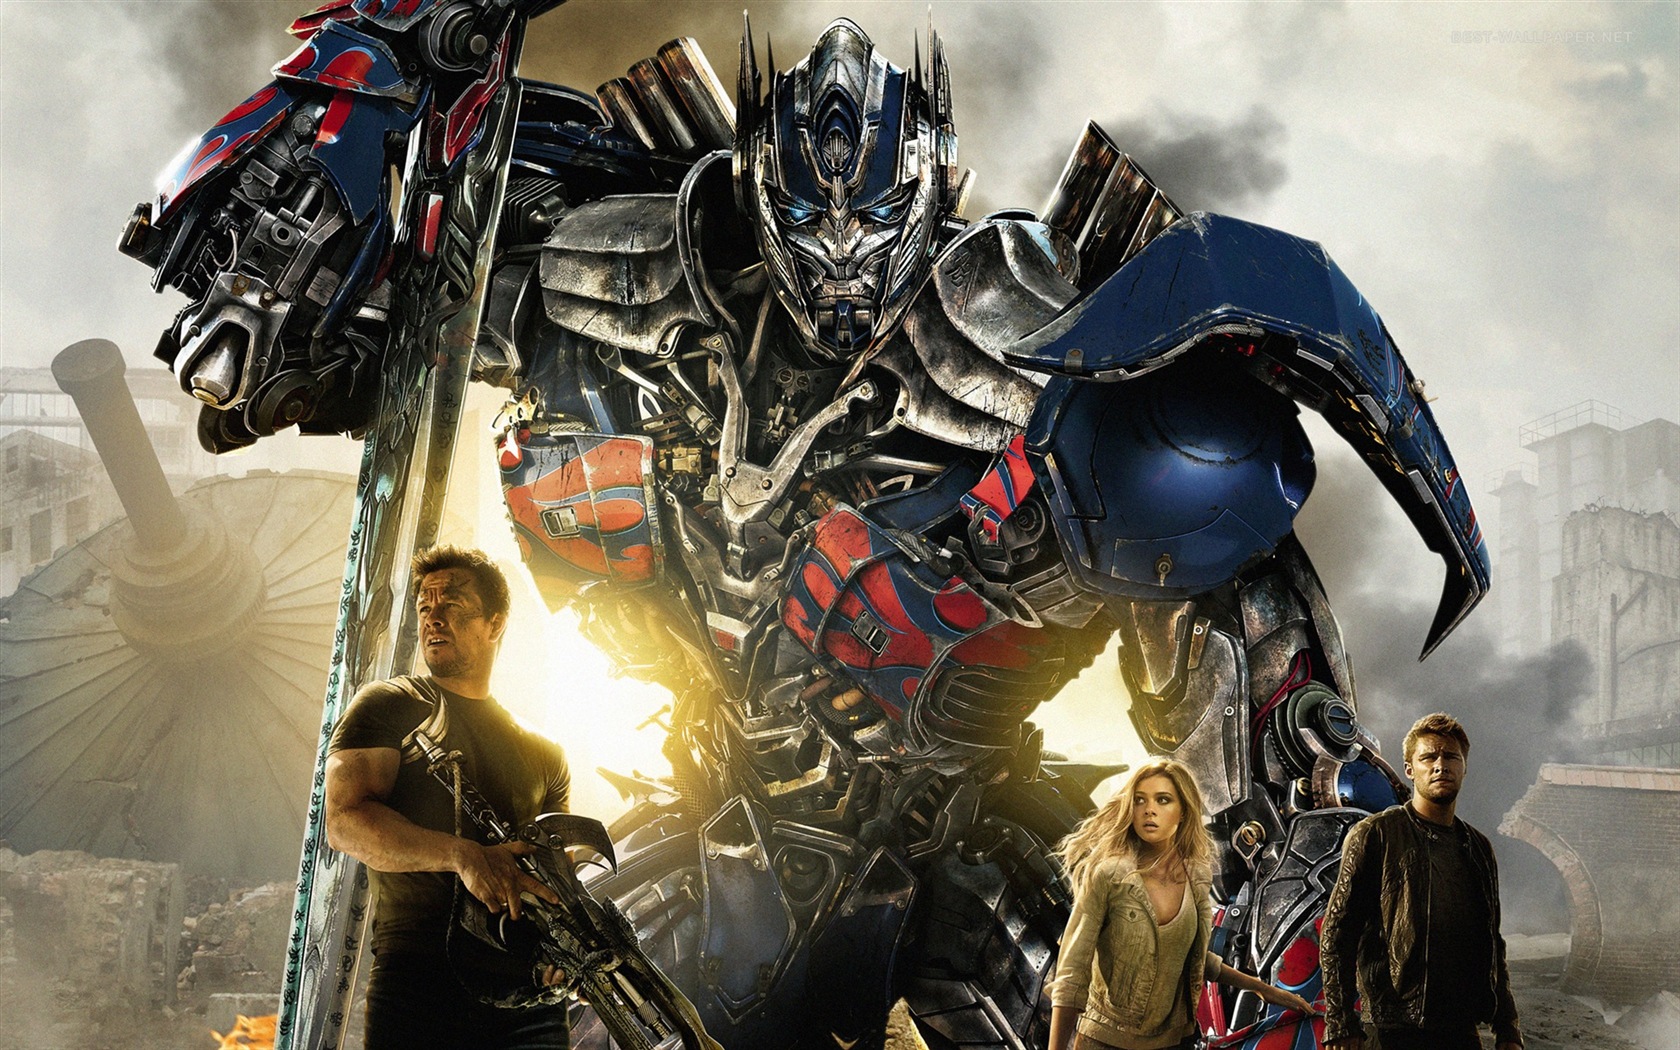 2014 Transformers: Age of Extinction HD tapety #1 - 1680x1050